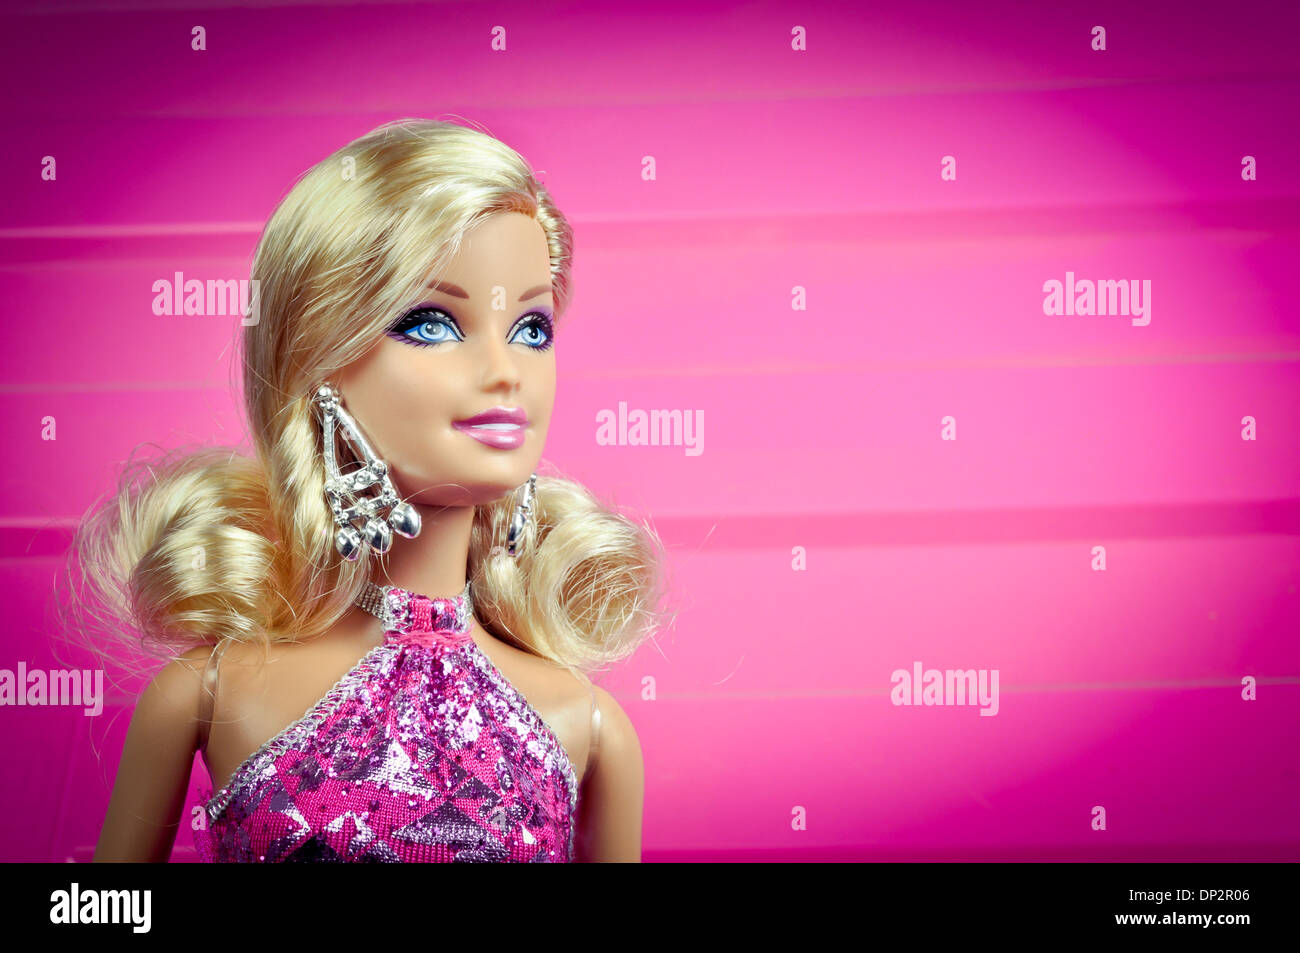 Barbie in pink dress over pink background Stock Photo